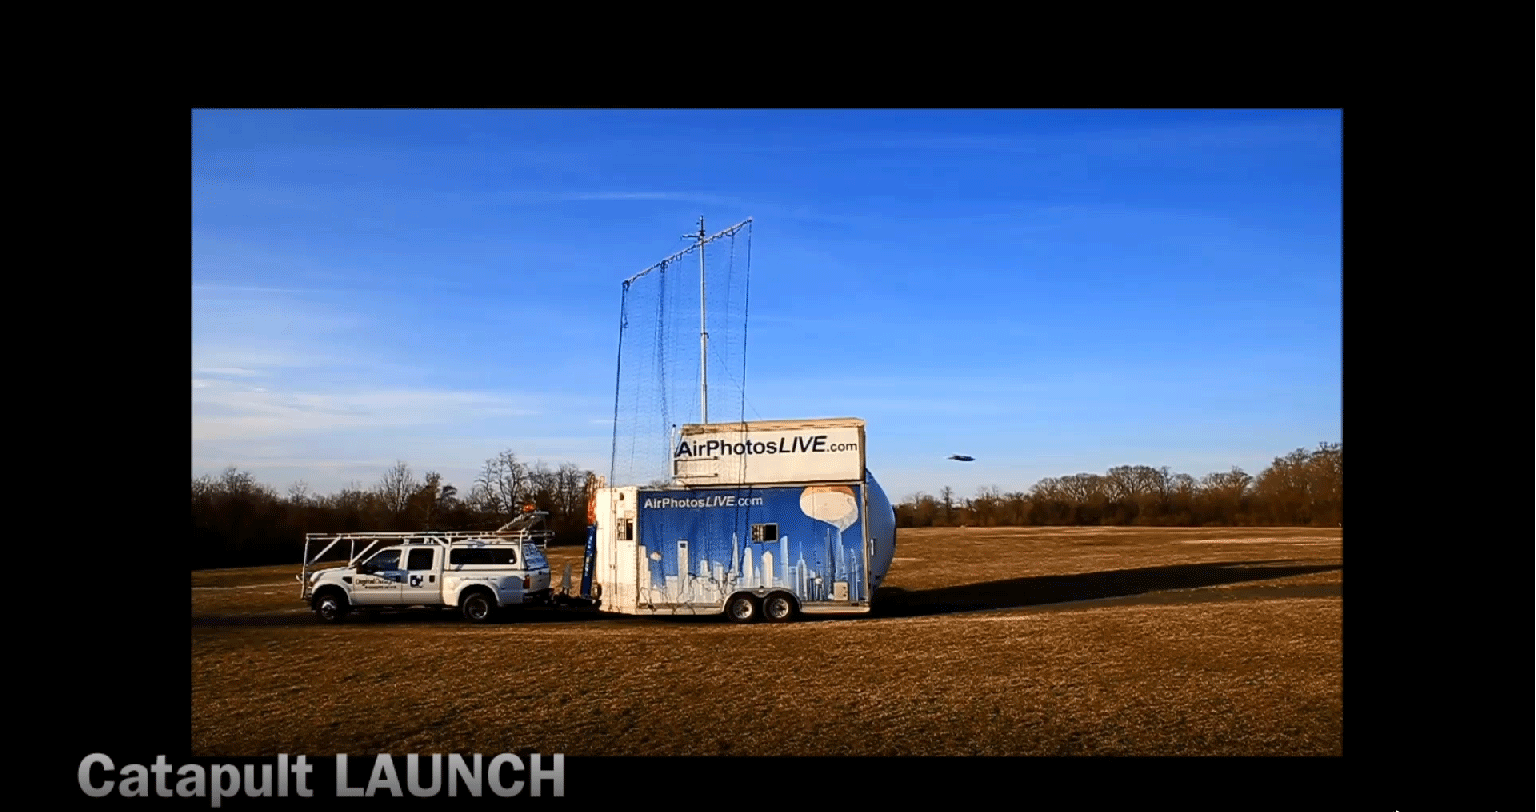 https://airphotoslive.com/wp-content/uploads/2021/05/launch_land.gif